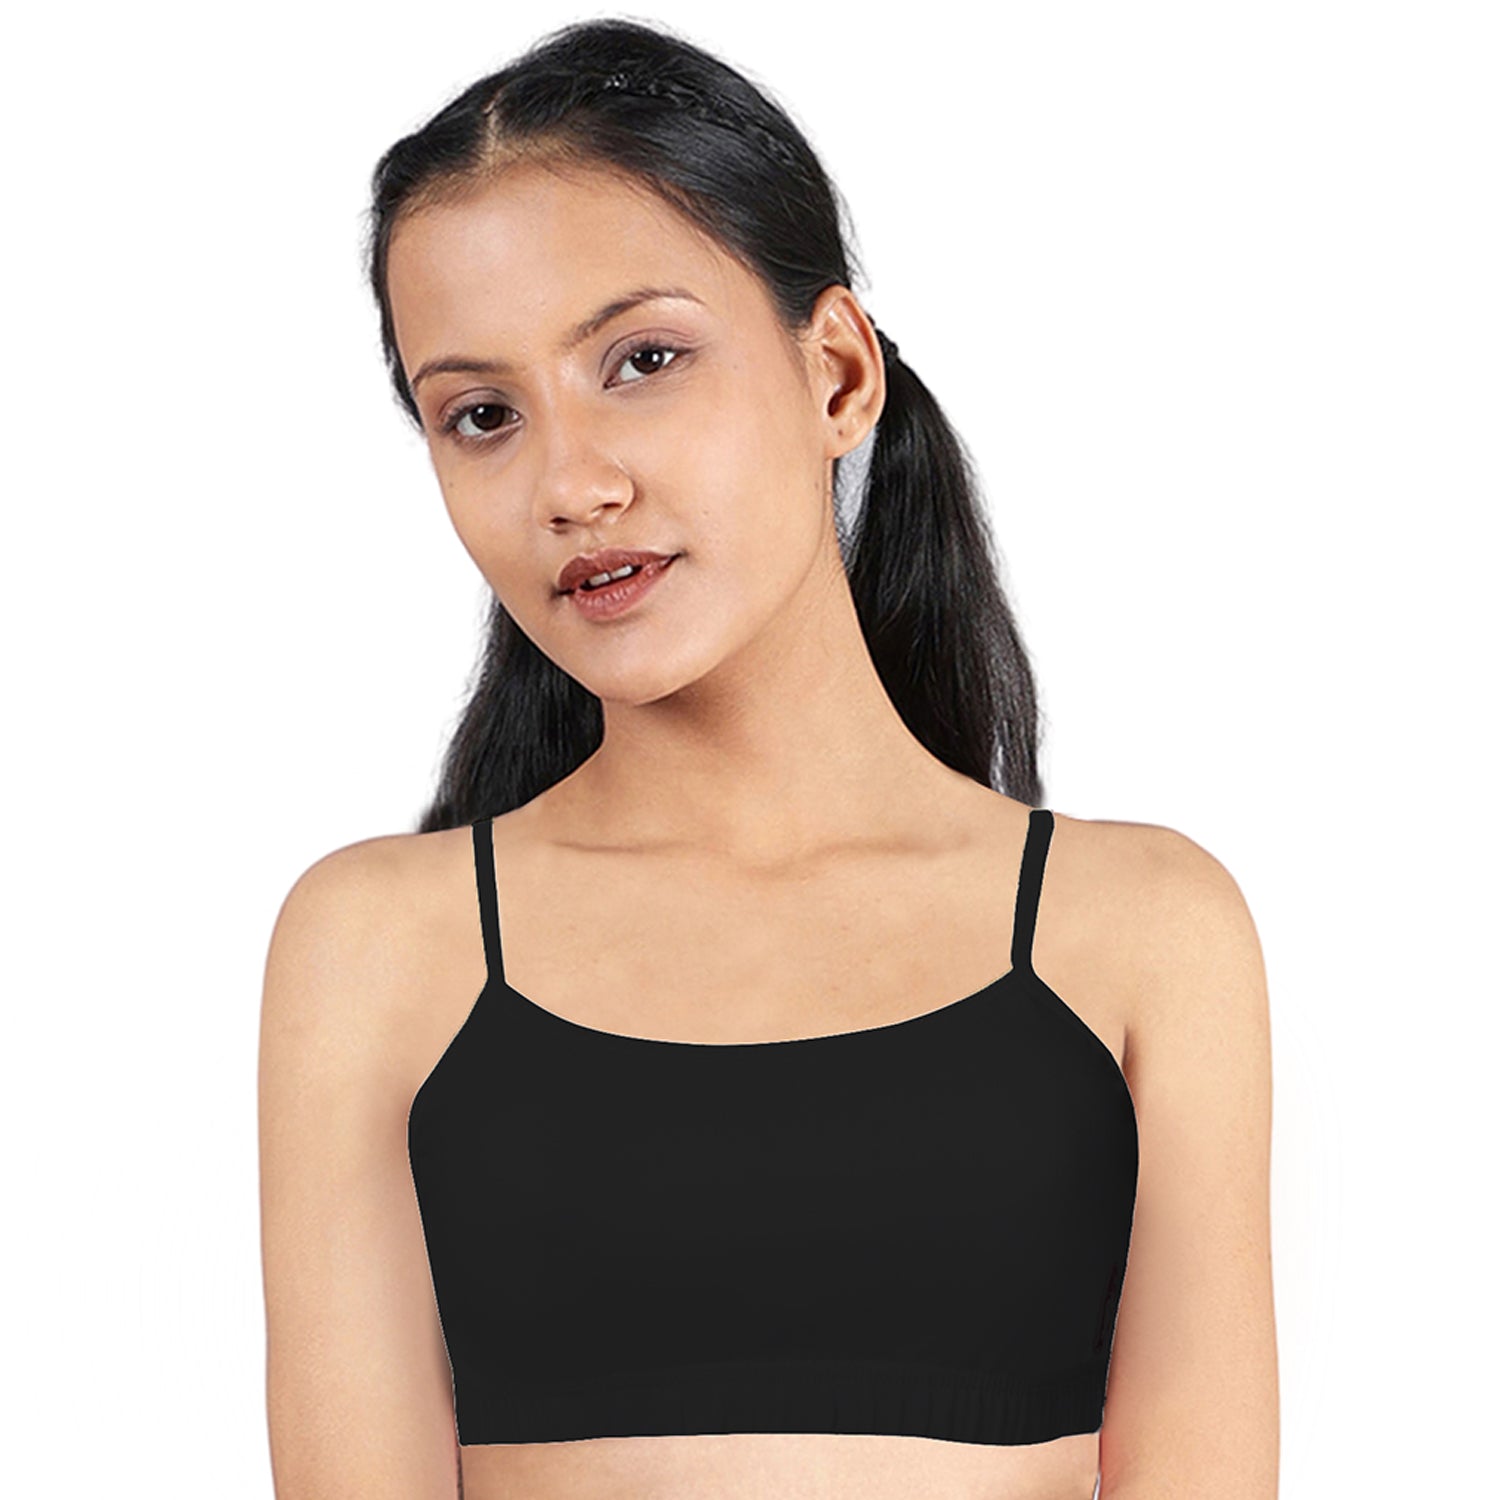 D'Chica Bras for Girls sale - discounted price